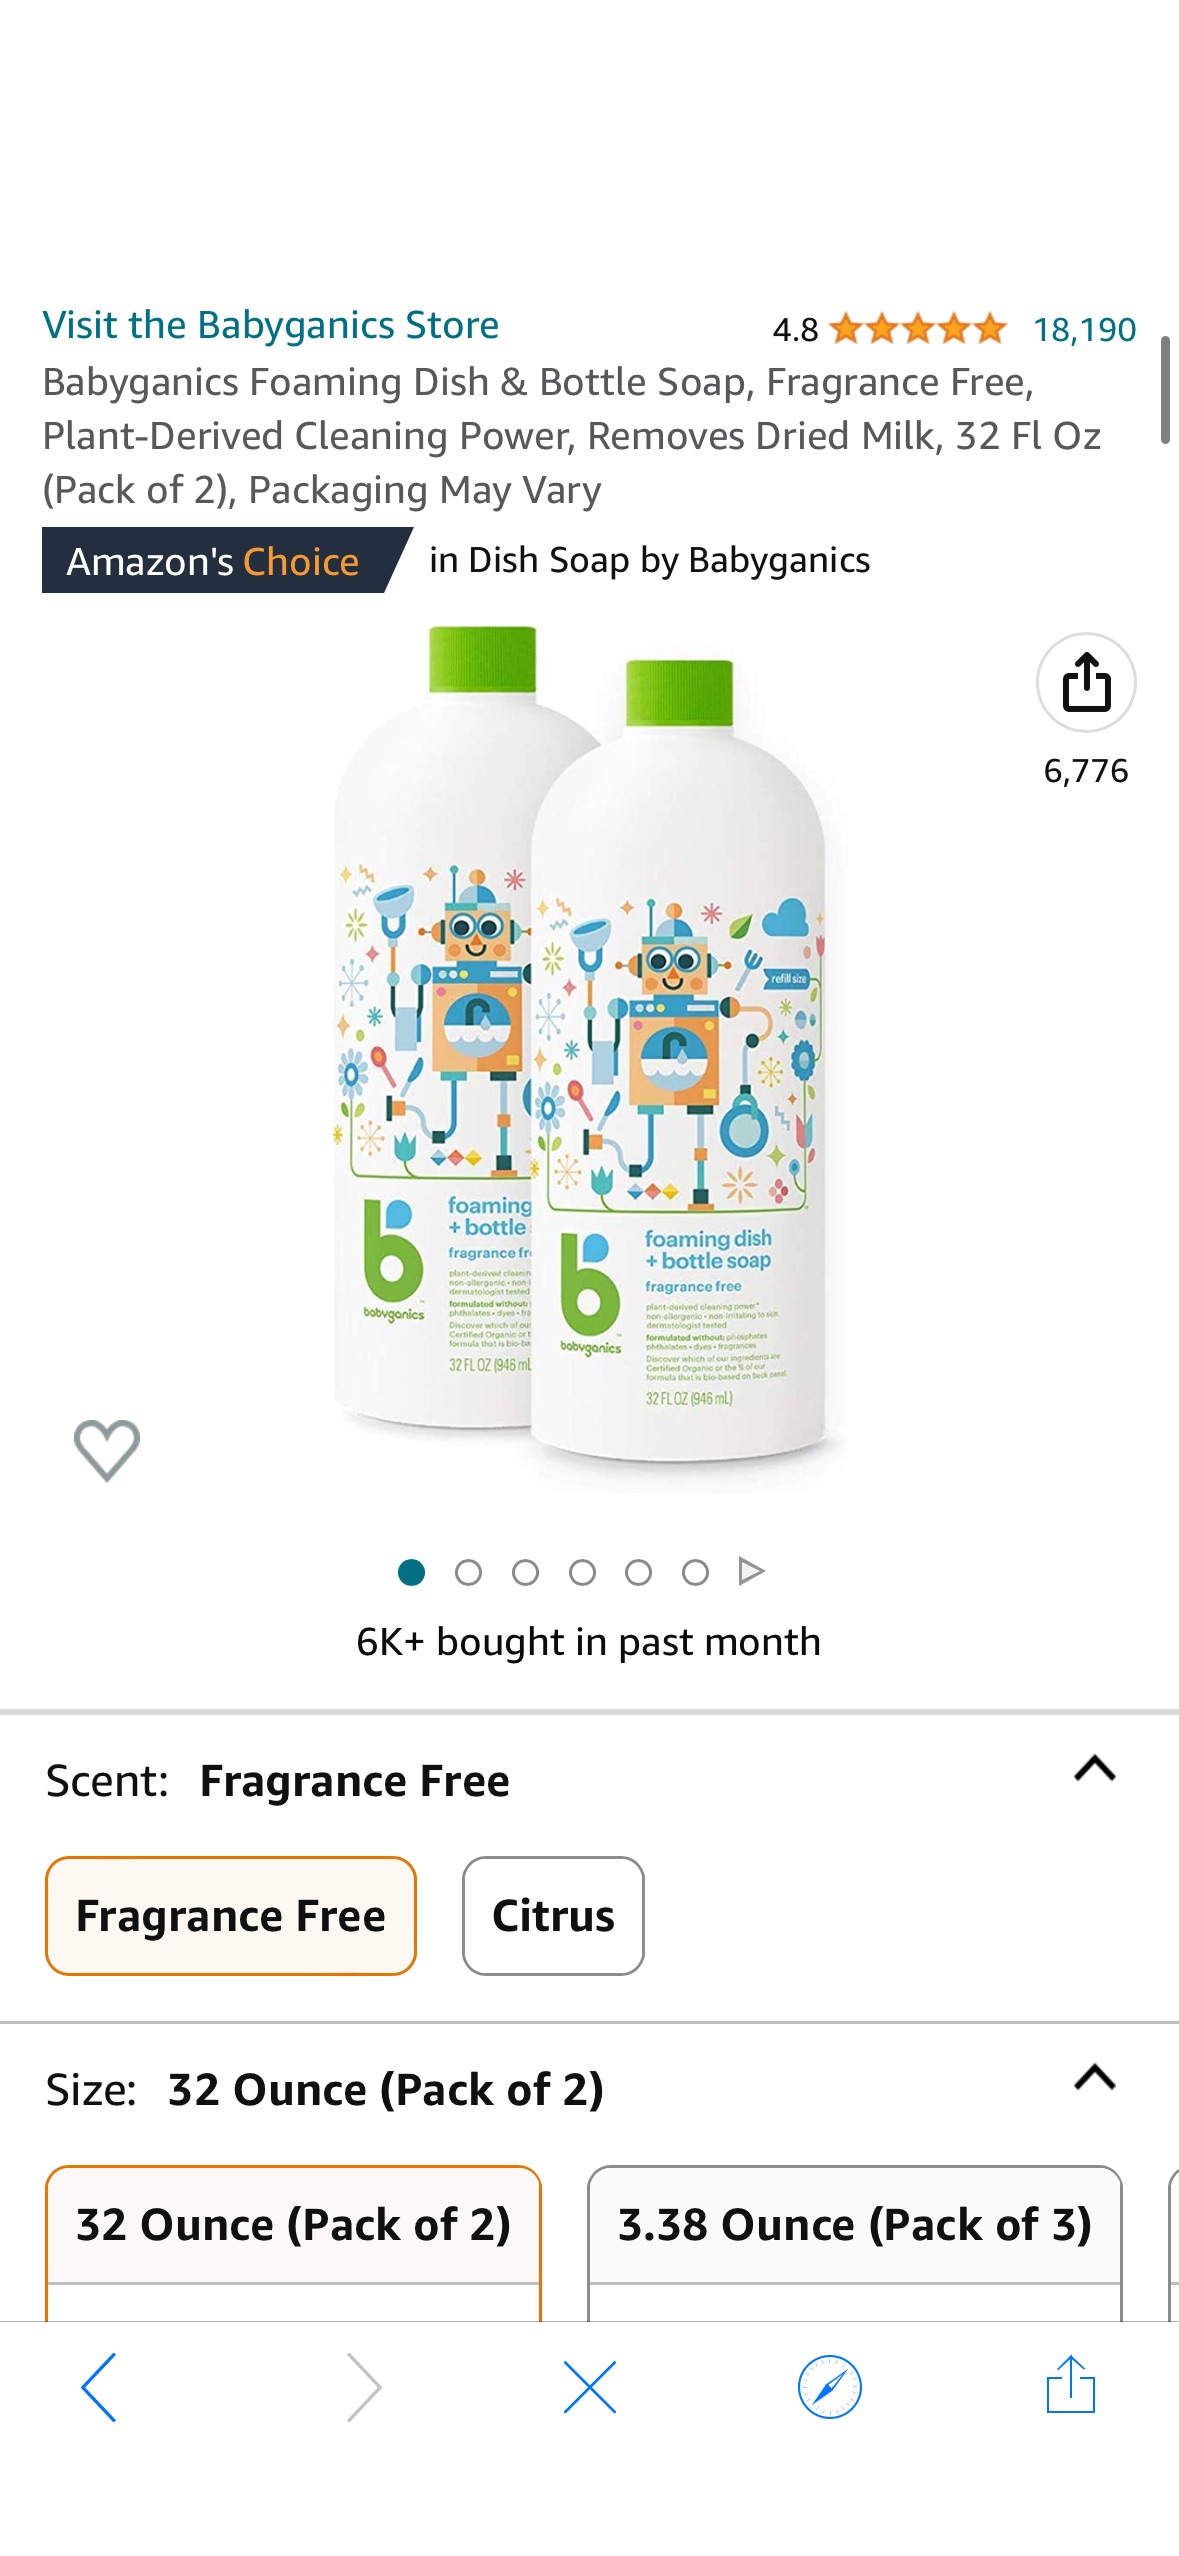 Amazon.com: Babyganics Foaming Dish & Bottle Soap, Fragrance Free, Plant-Derived Cleaning Power, Removes Dried Milk, 32 Fl Oz (Pack of 2), Packaging May Vary :奶瓶清洁剂